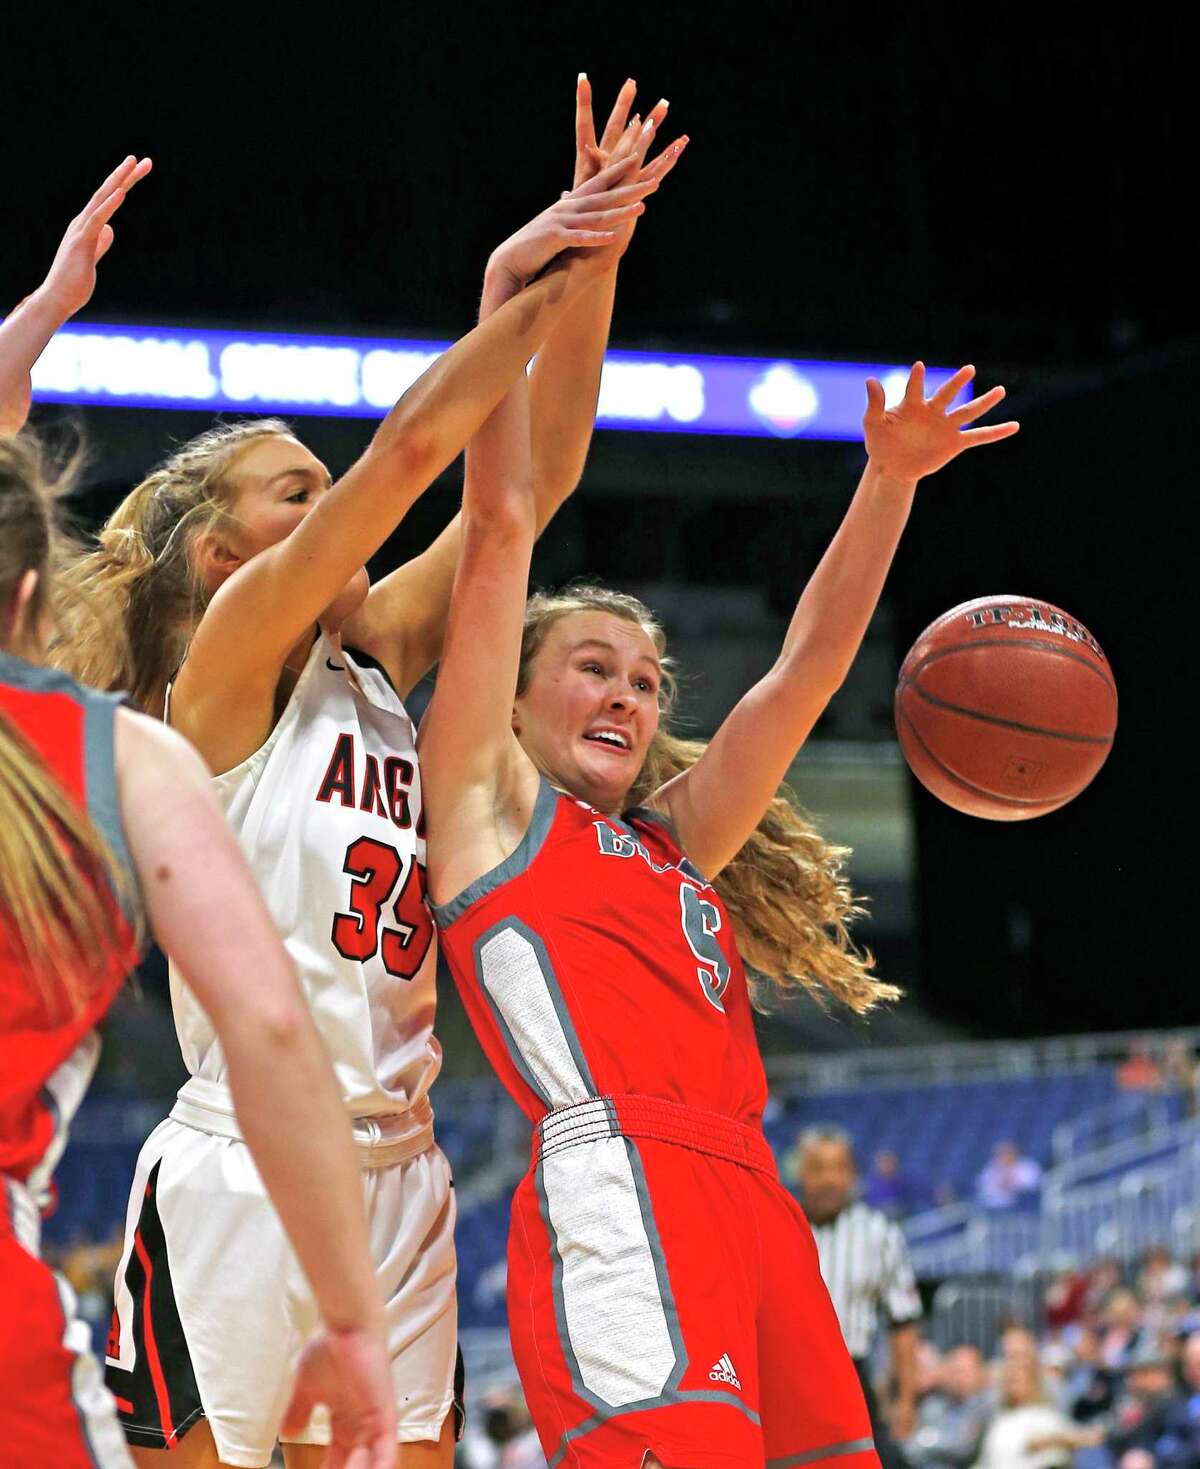 Argyle forward Shelby Henches #35 battles Fredericksburg forward Caitie Huff #5 in Class 4A state semifinal where Argyle defeated Fredericksburg 49-38 on Friday, March 6, 2020 at the Alamodome. (Ron Cortes/Contributor)